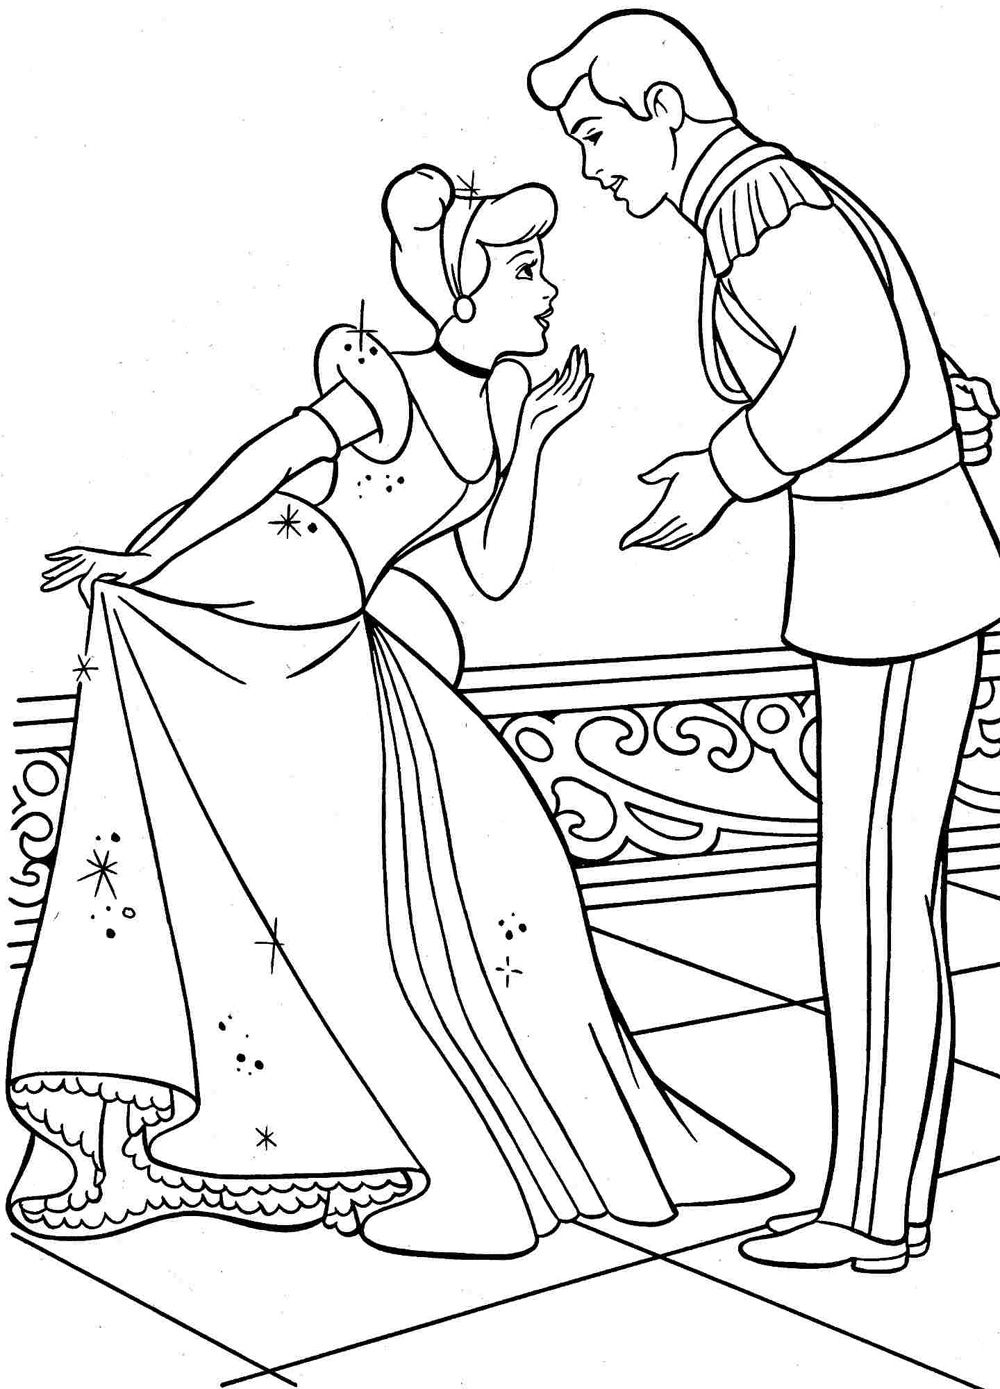 cinderella-coloring-pages-to-print